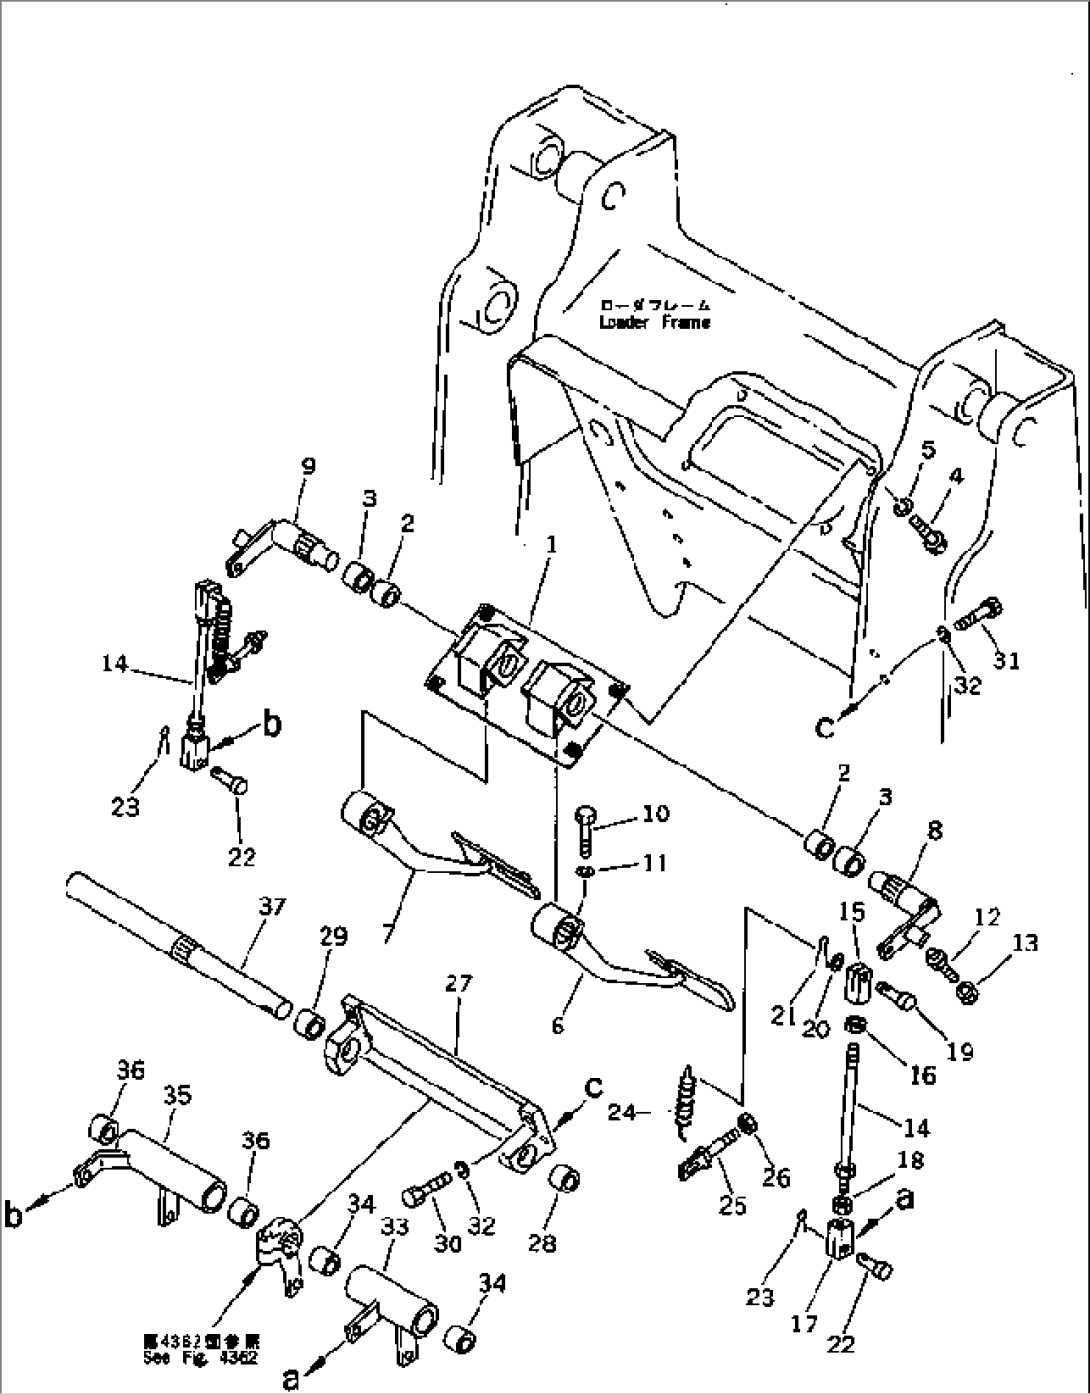 STEERING PEDAL (FOR PEDAL STEERING) (NOISE SUPPRESION FOR EC)(#40238-)